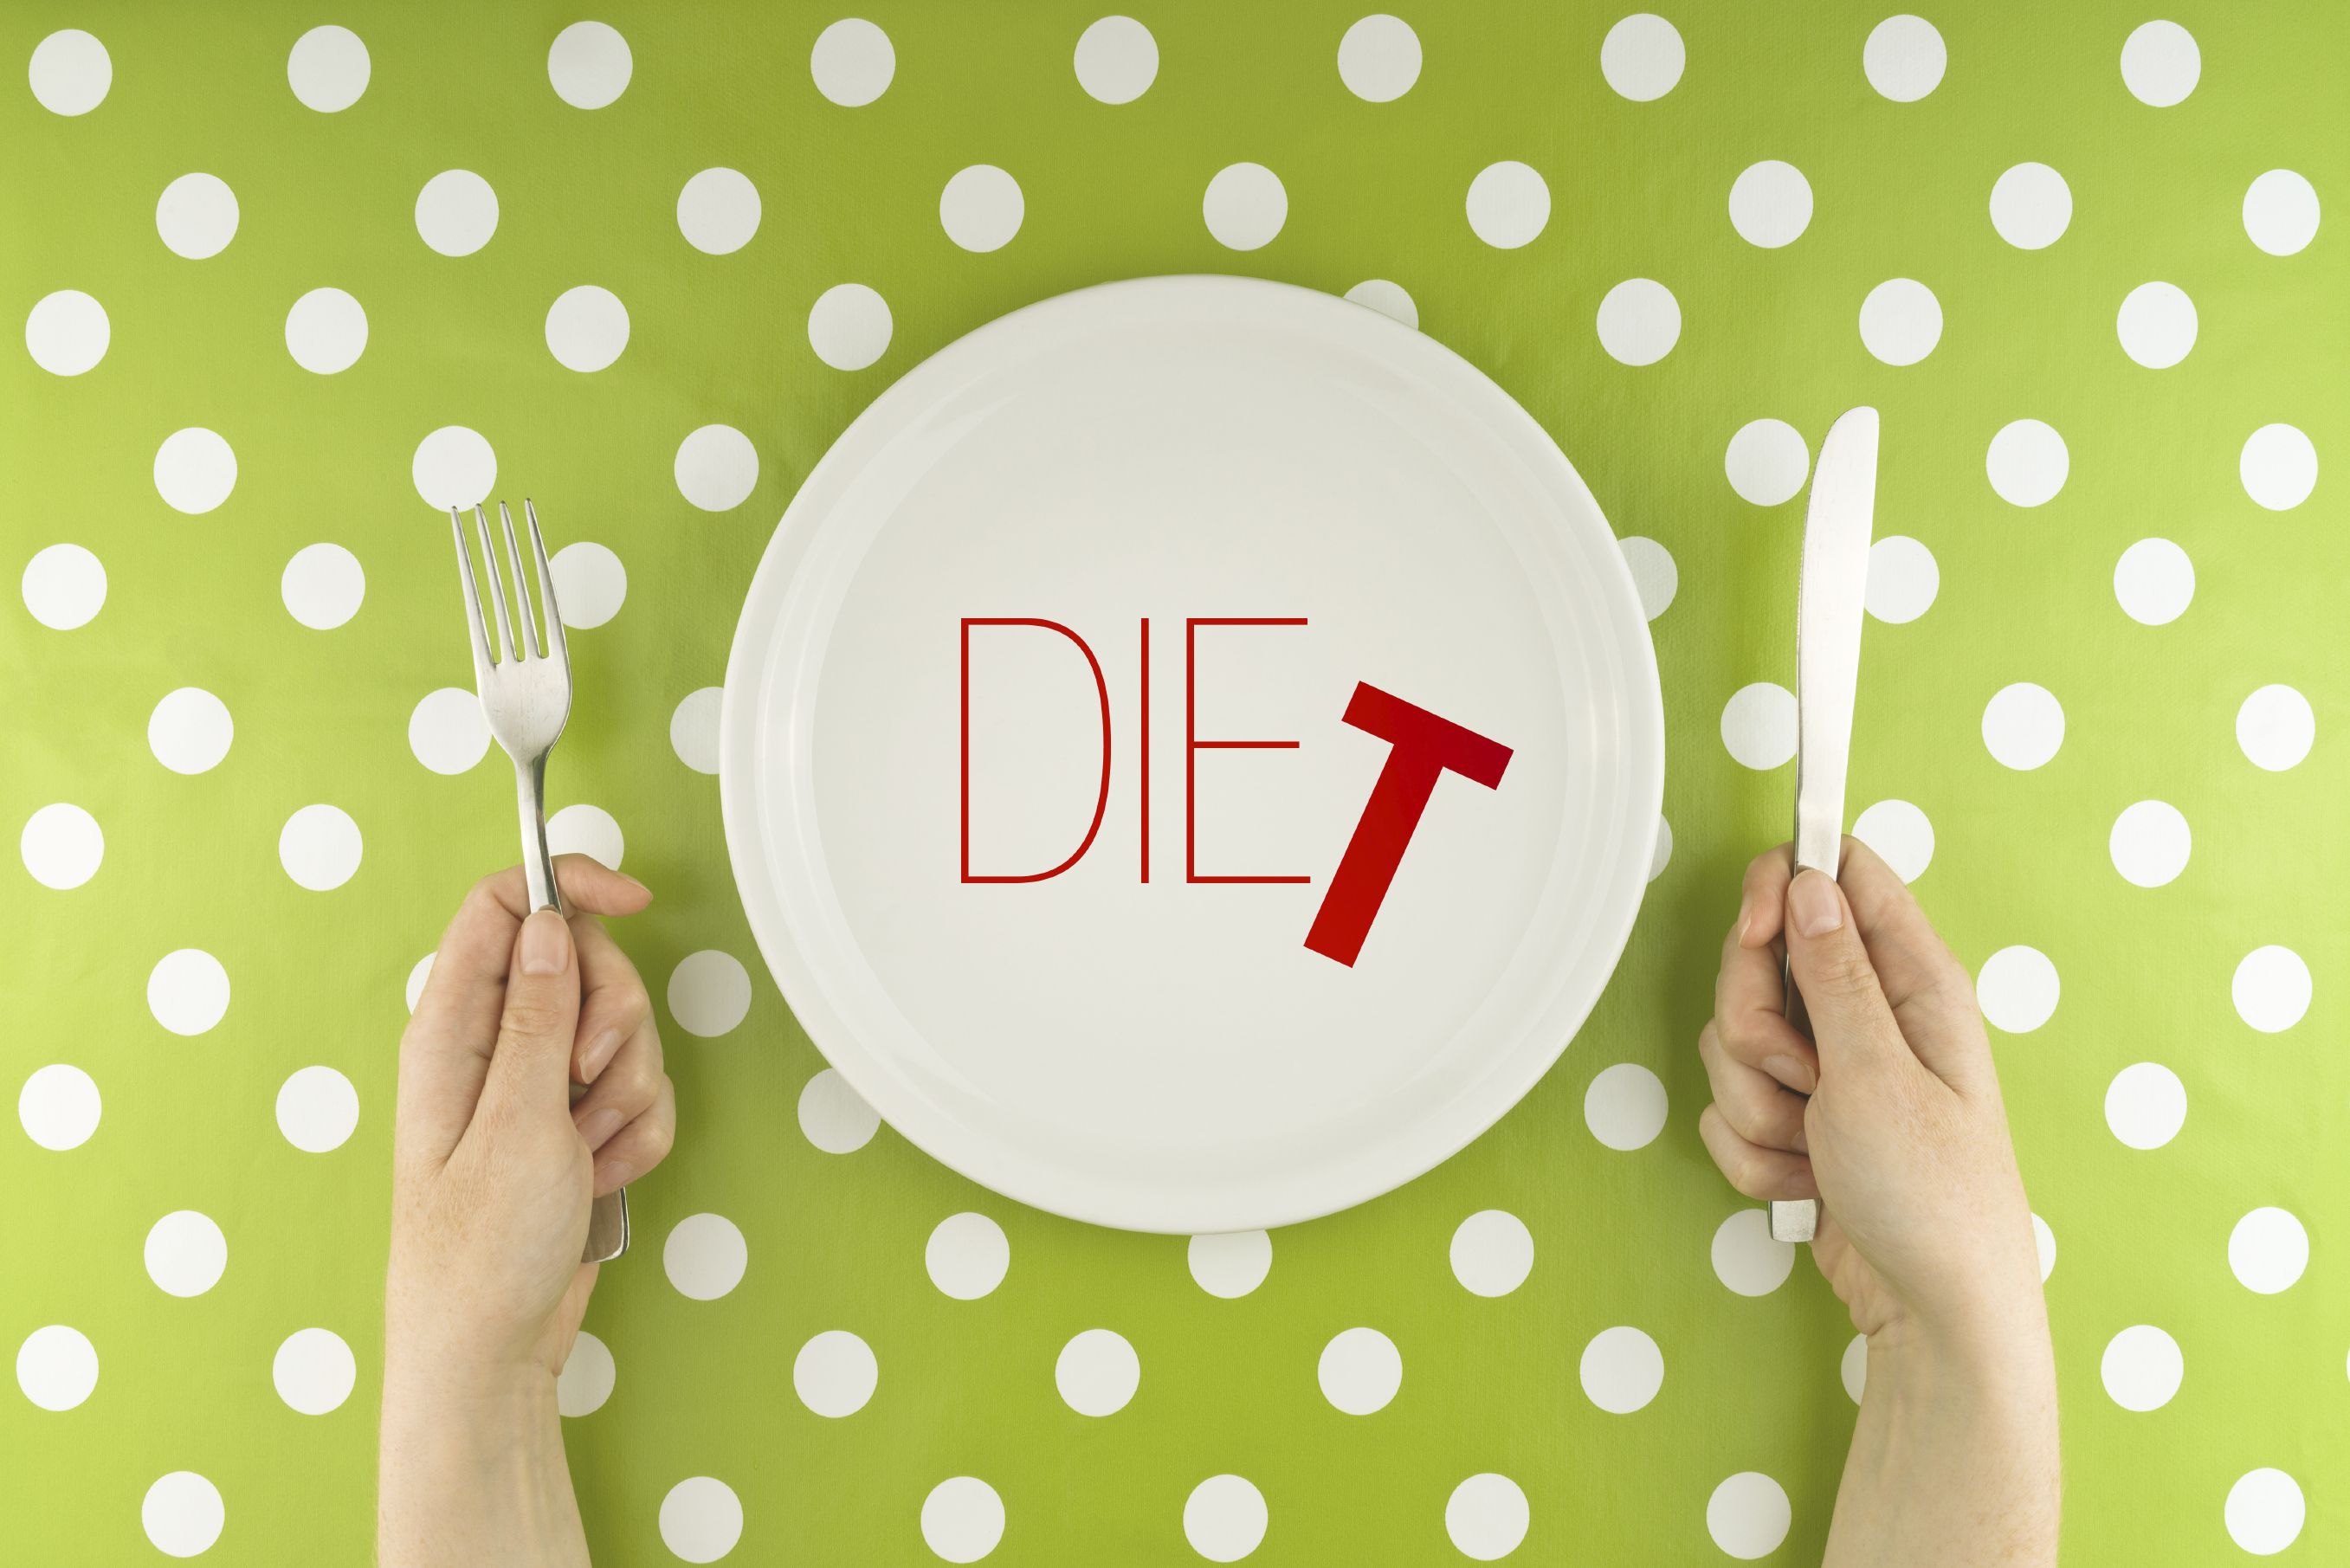 5-Signs-Your-Diet-is-a-Fail-Q4fit.com